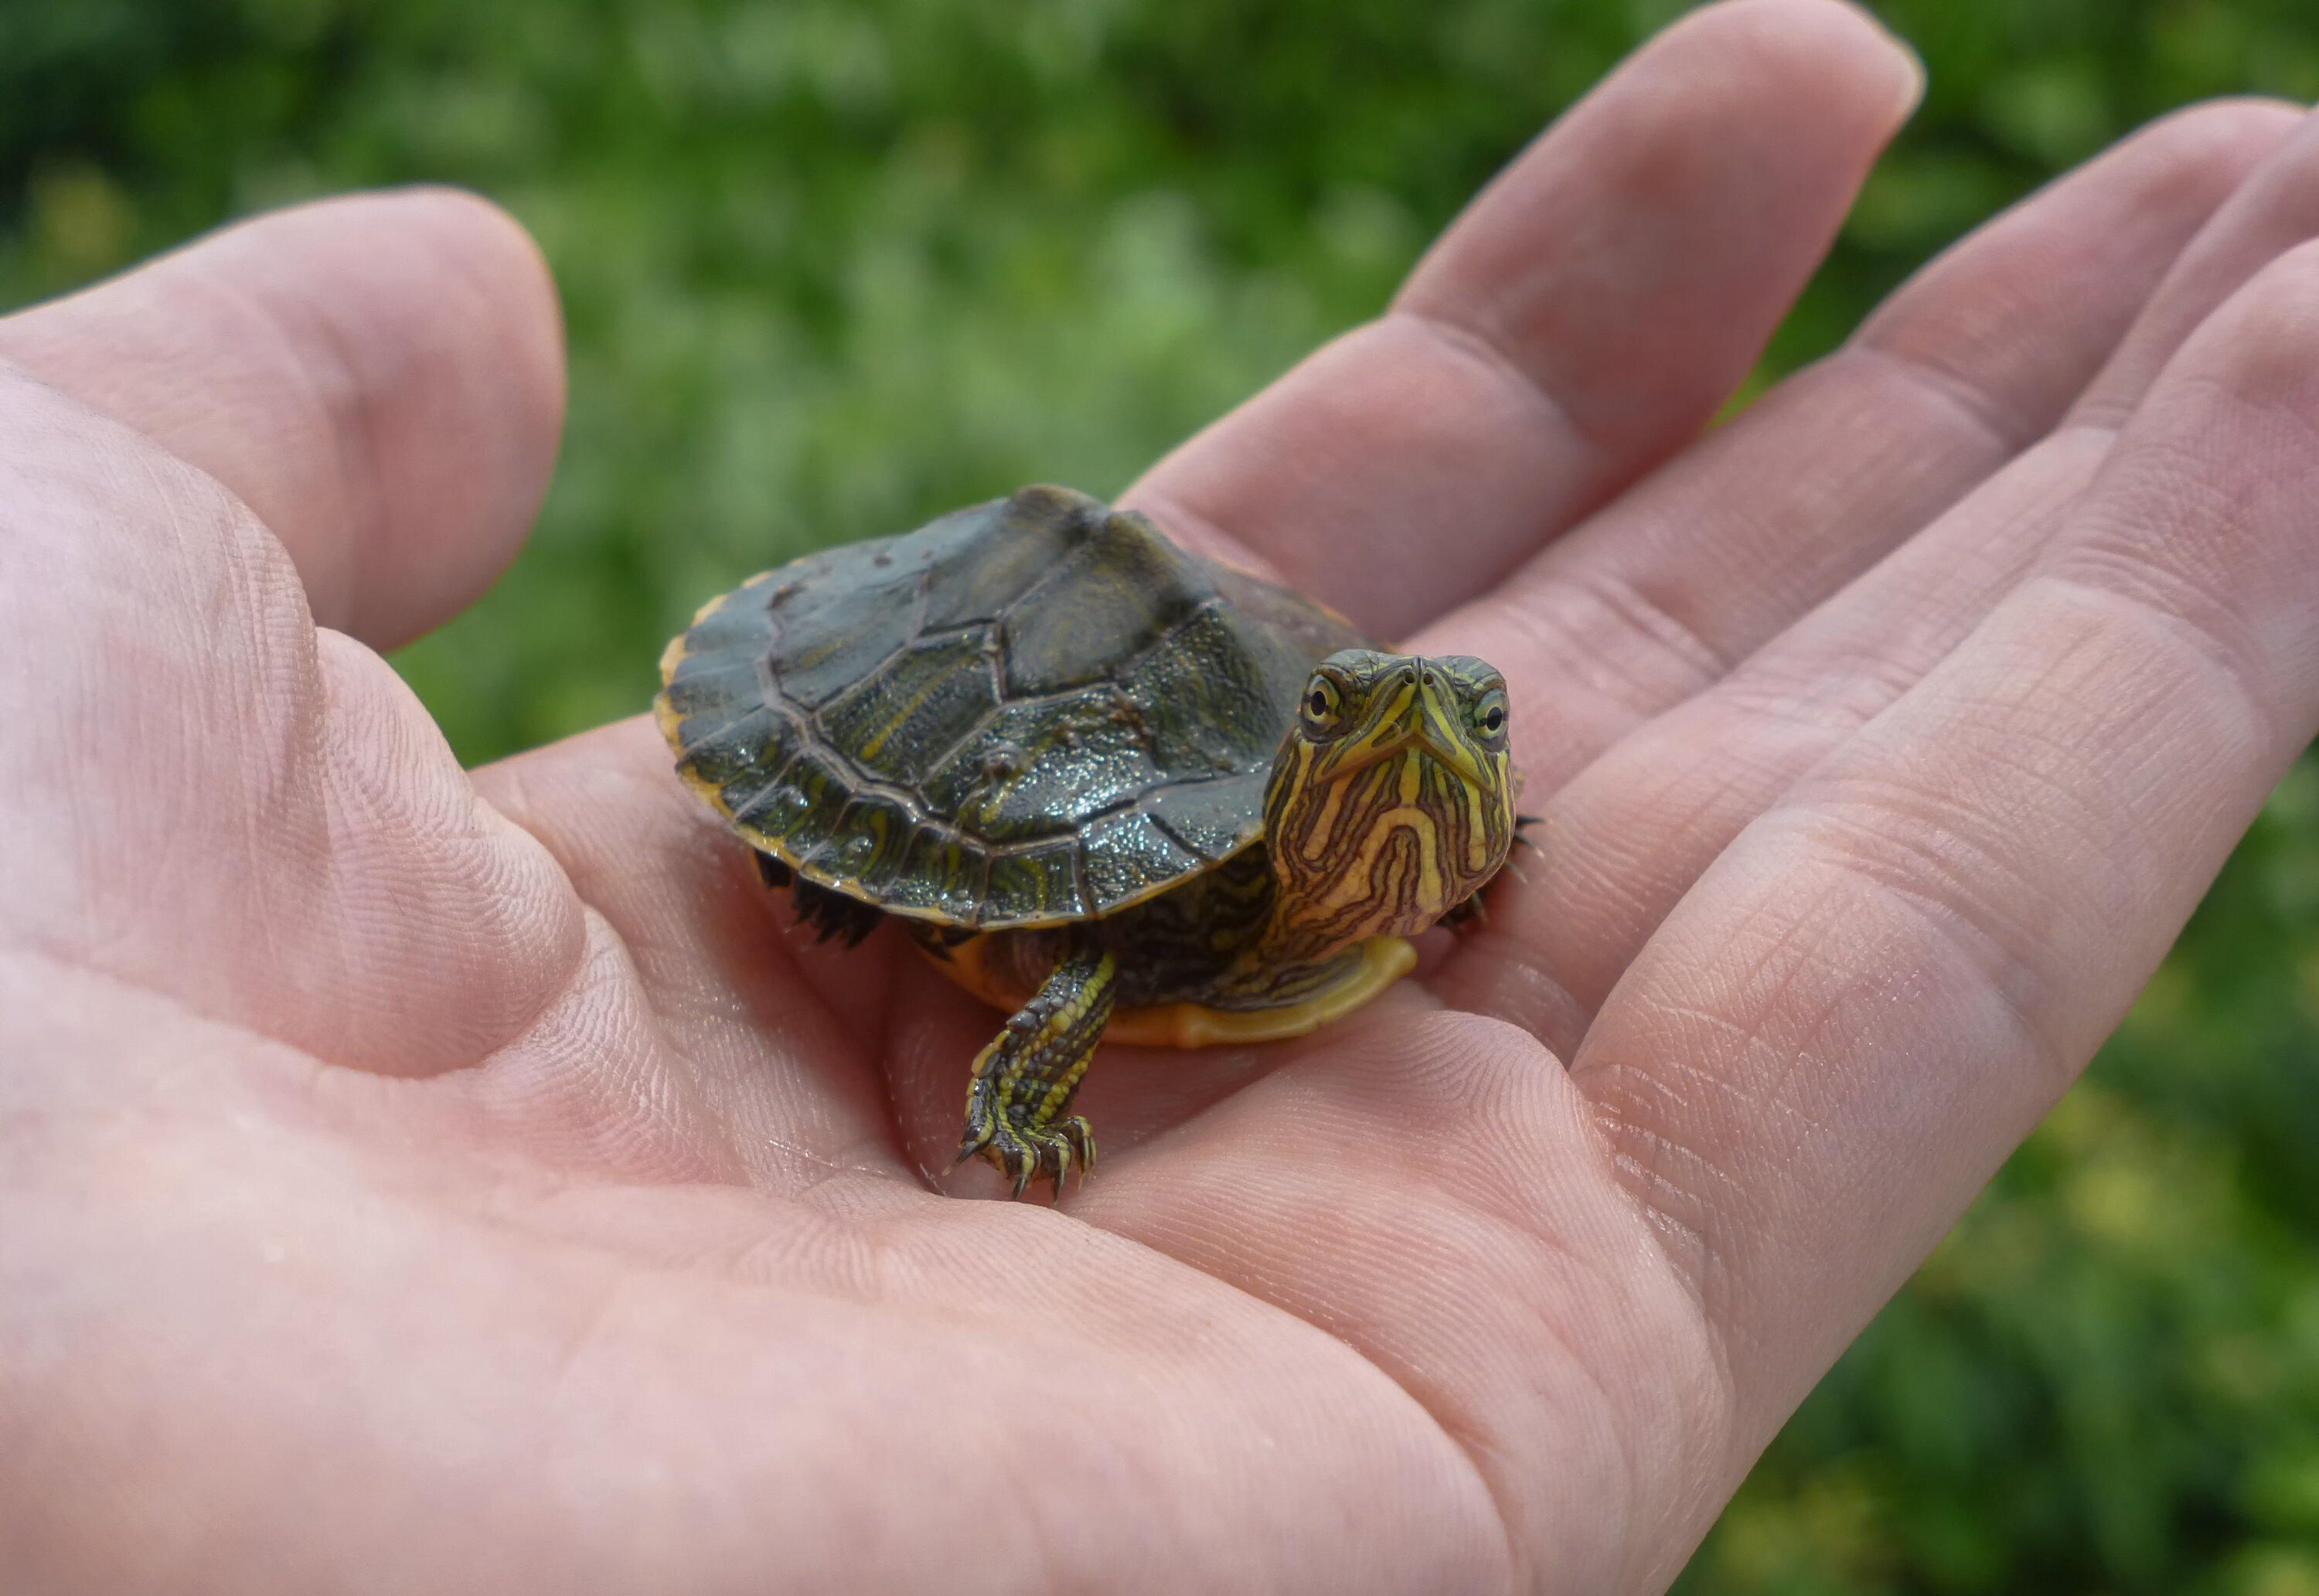 Update on Multistate Outbreak of Salmonella Typhimurium Infections Linked to Small Pet Turtles